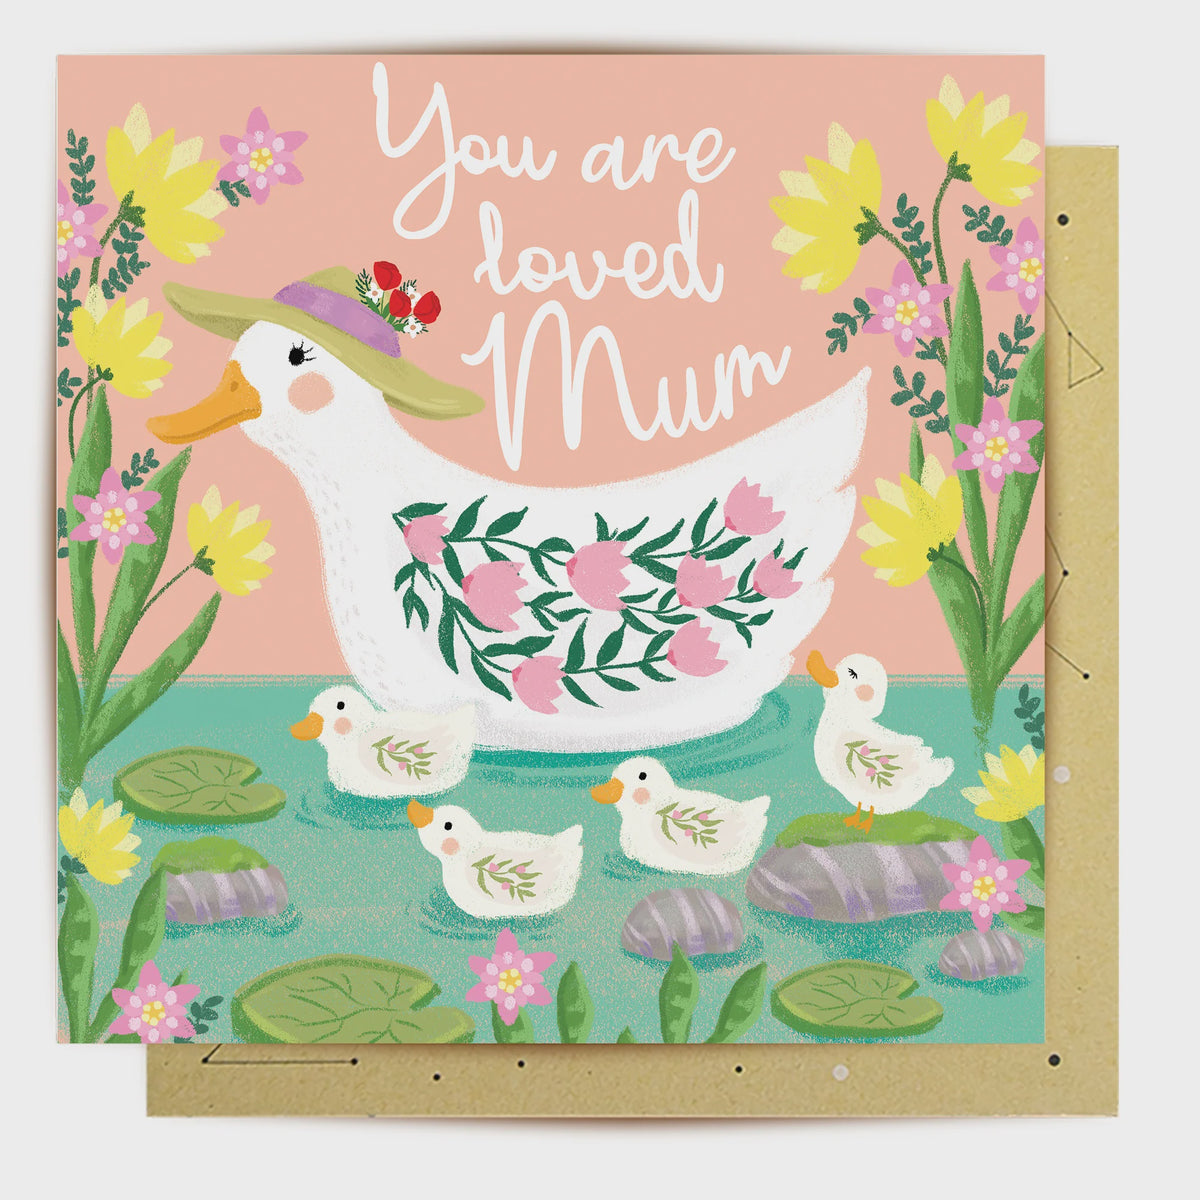 You are loved Mum - Greeting Card